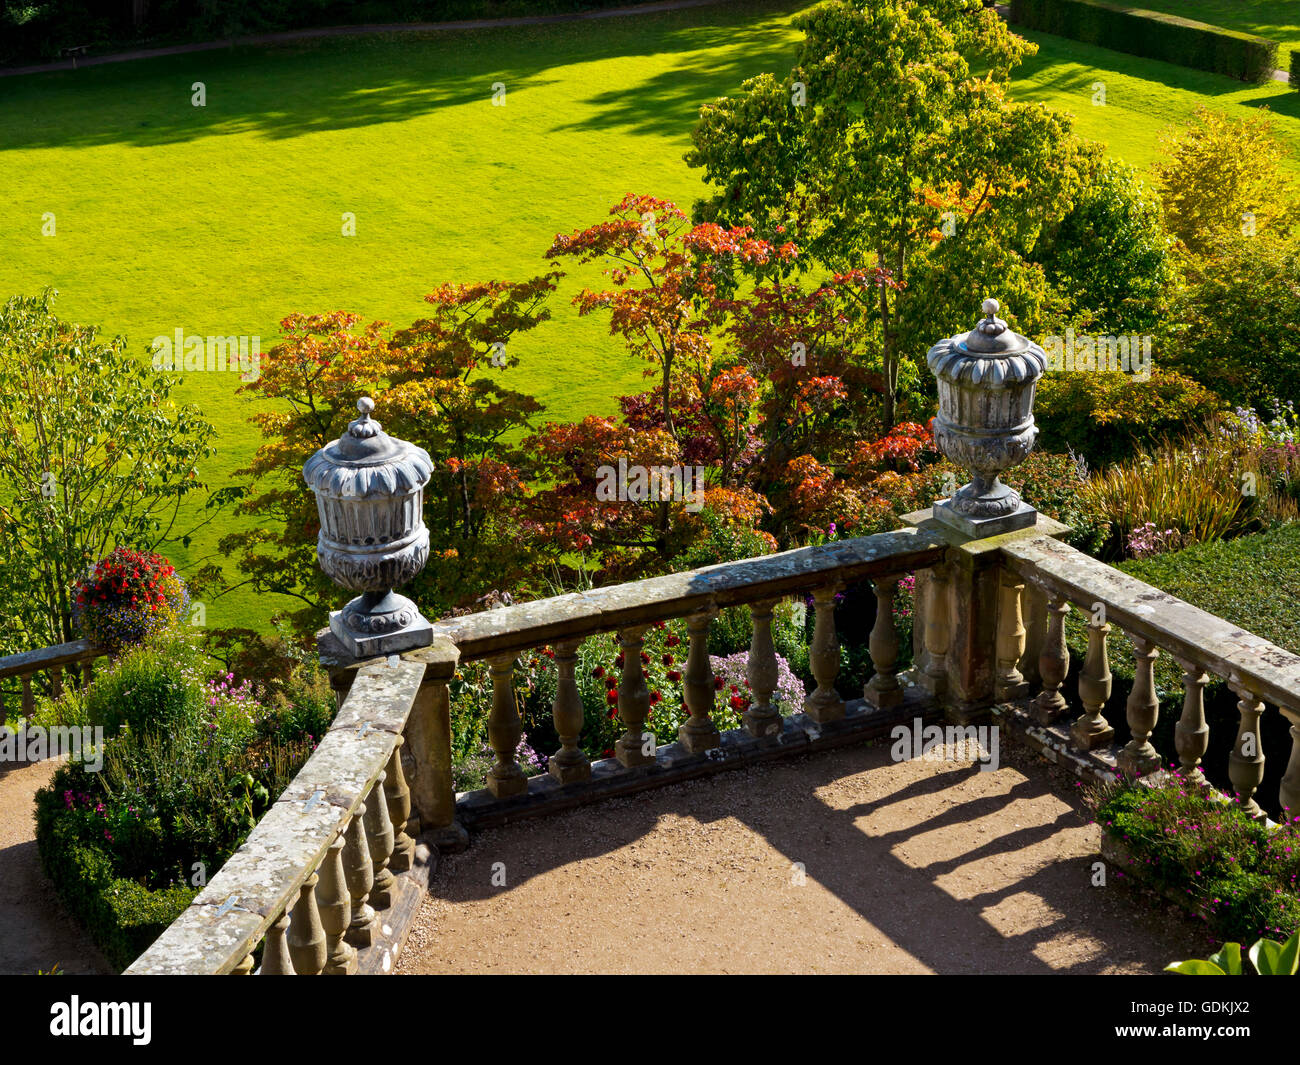 View looking down on stone balustrade with urns in a formal garden with lawn in the background in summer sunshine Stock Photo